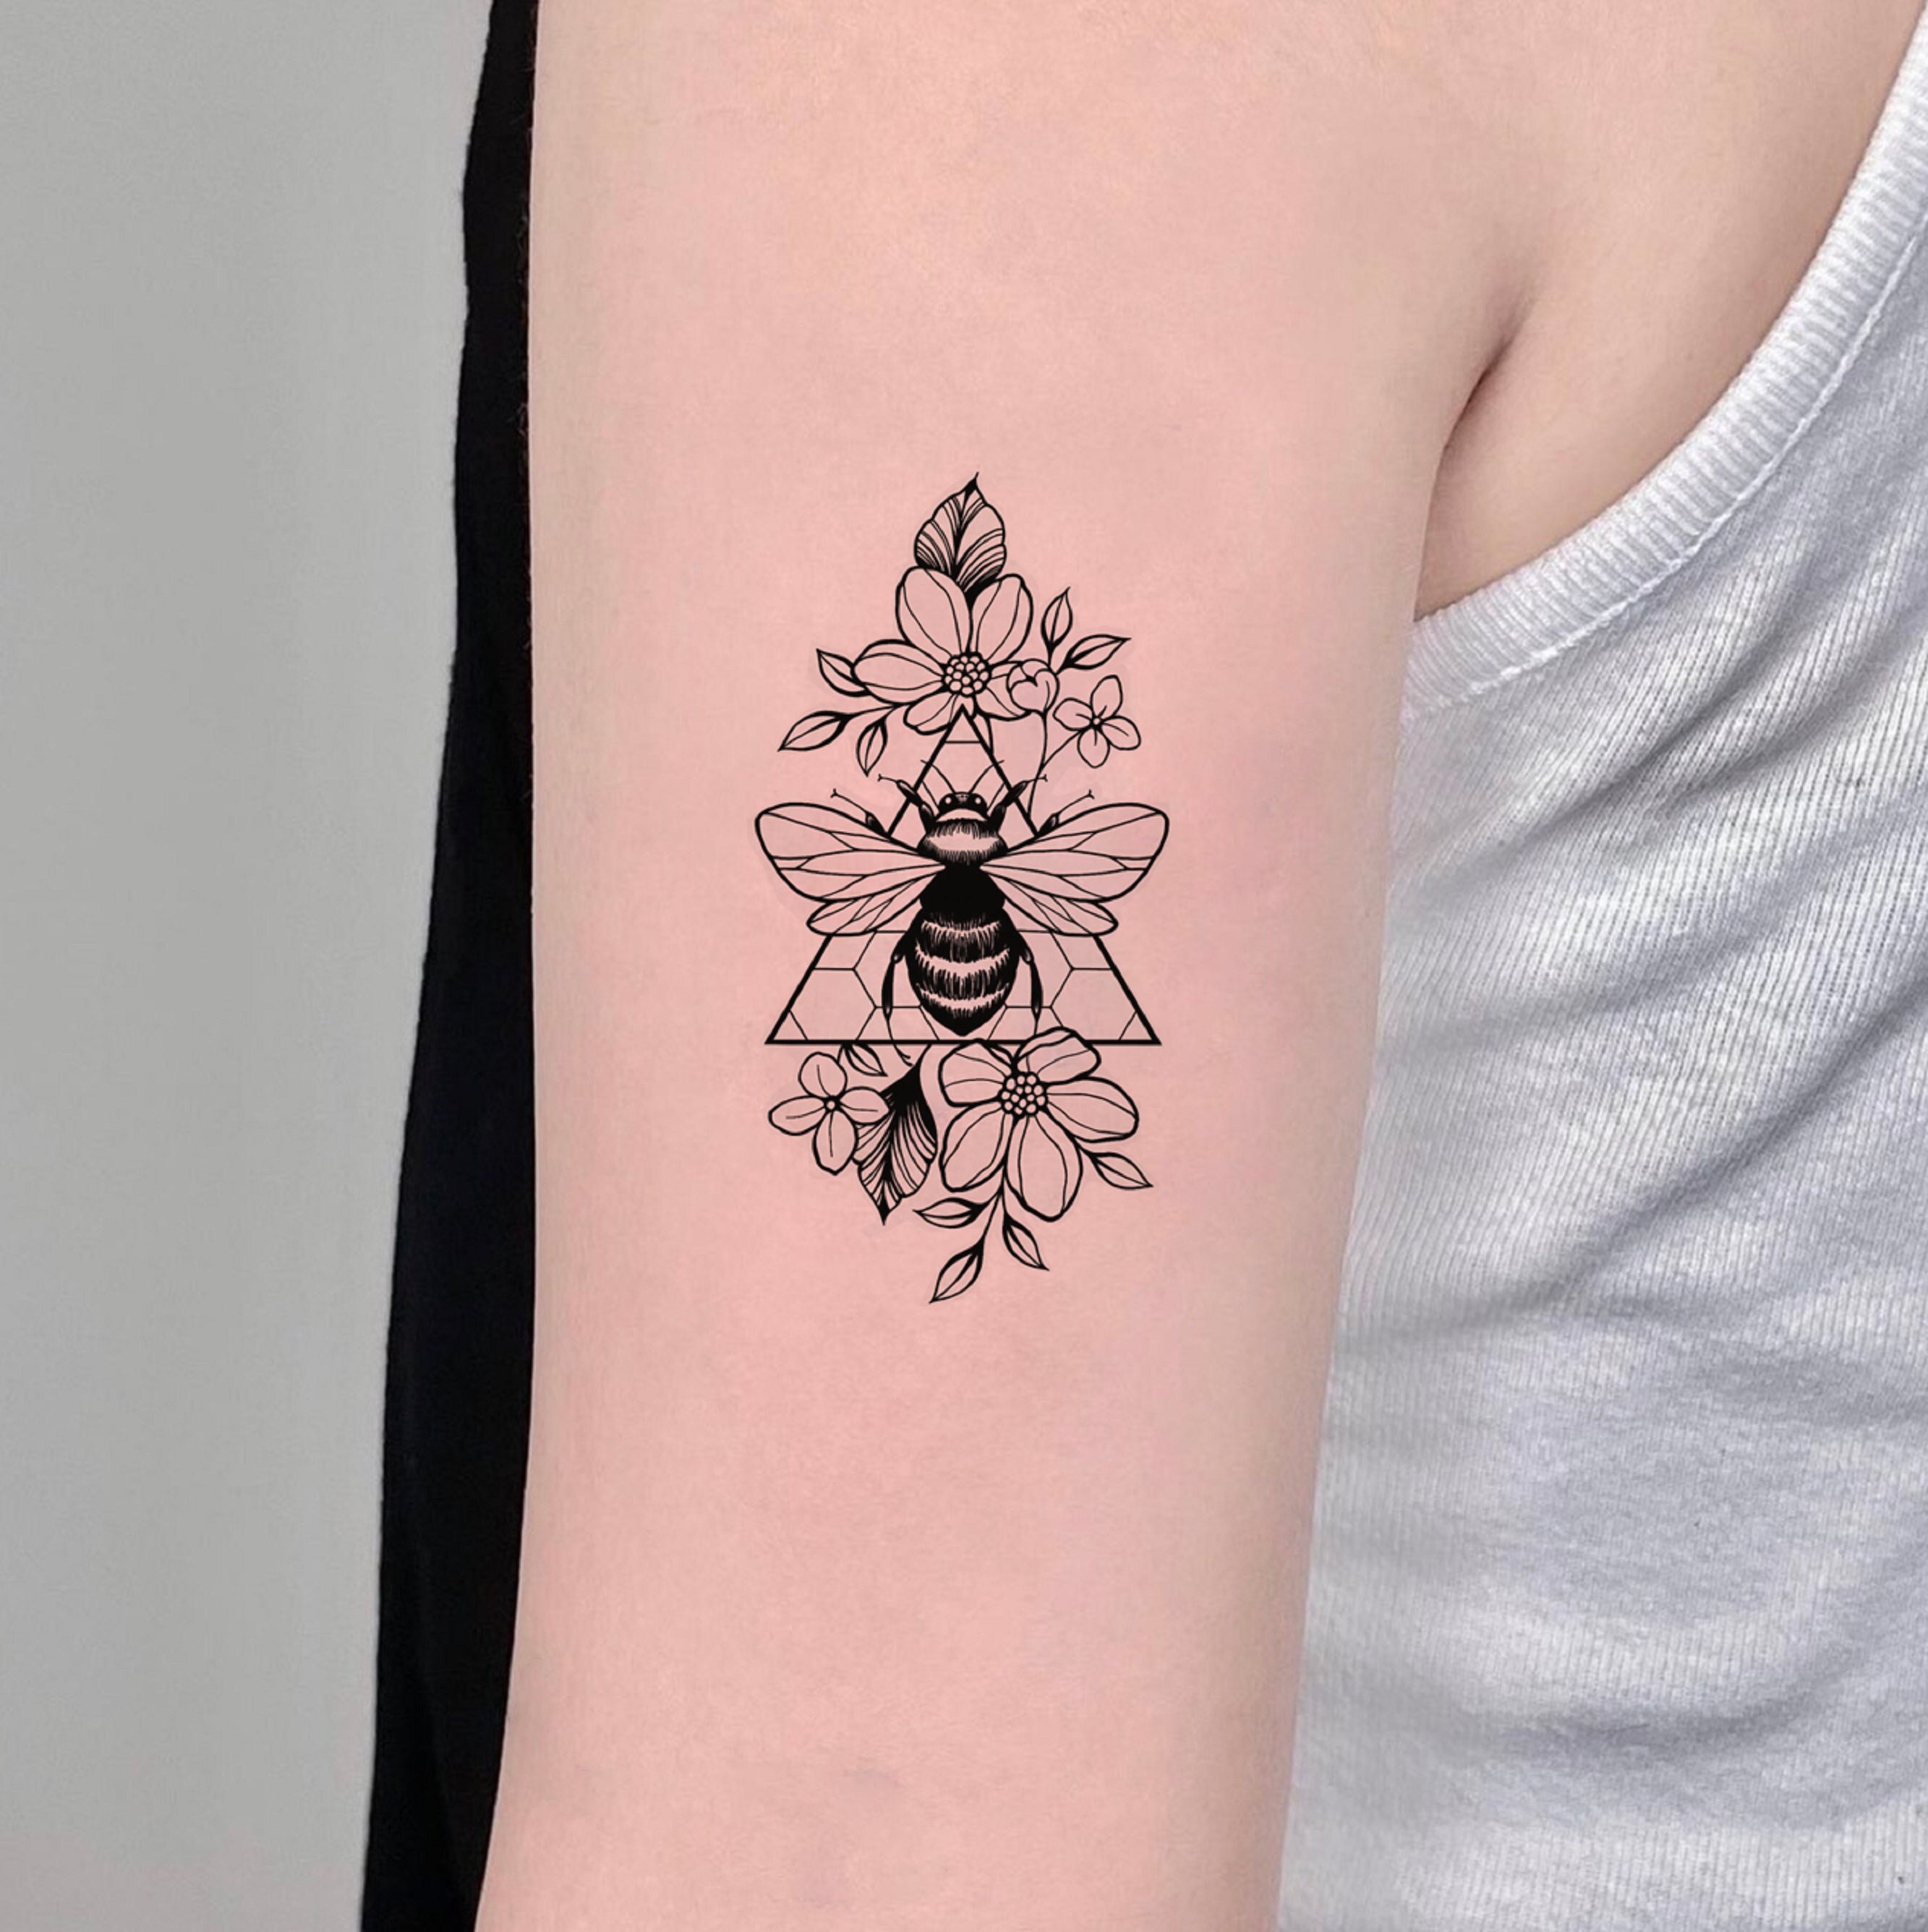 My recently acquired Tattoo featuring a swarm of bees native to Australia  making their way to a bouquet of native Australian flowers  rbees